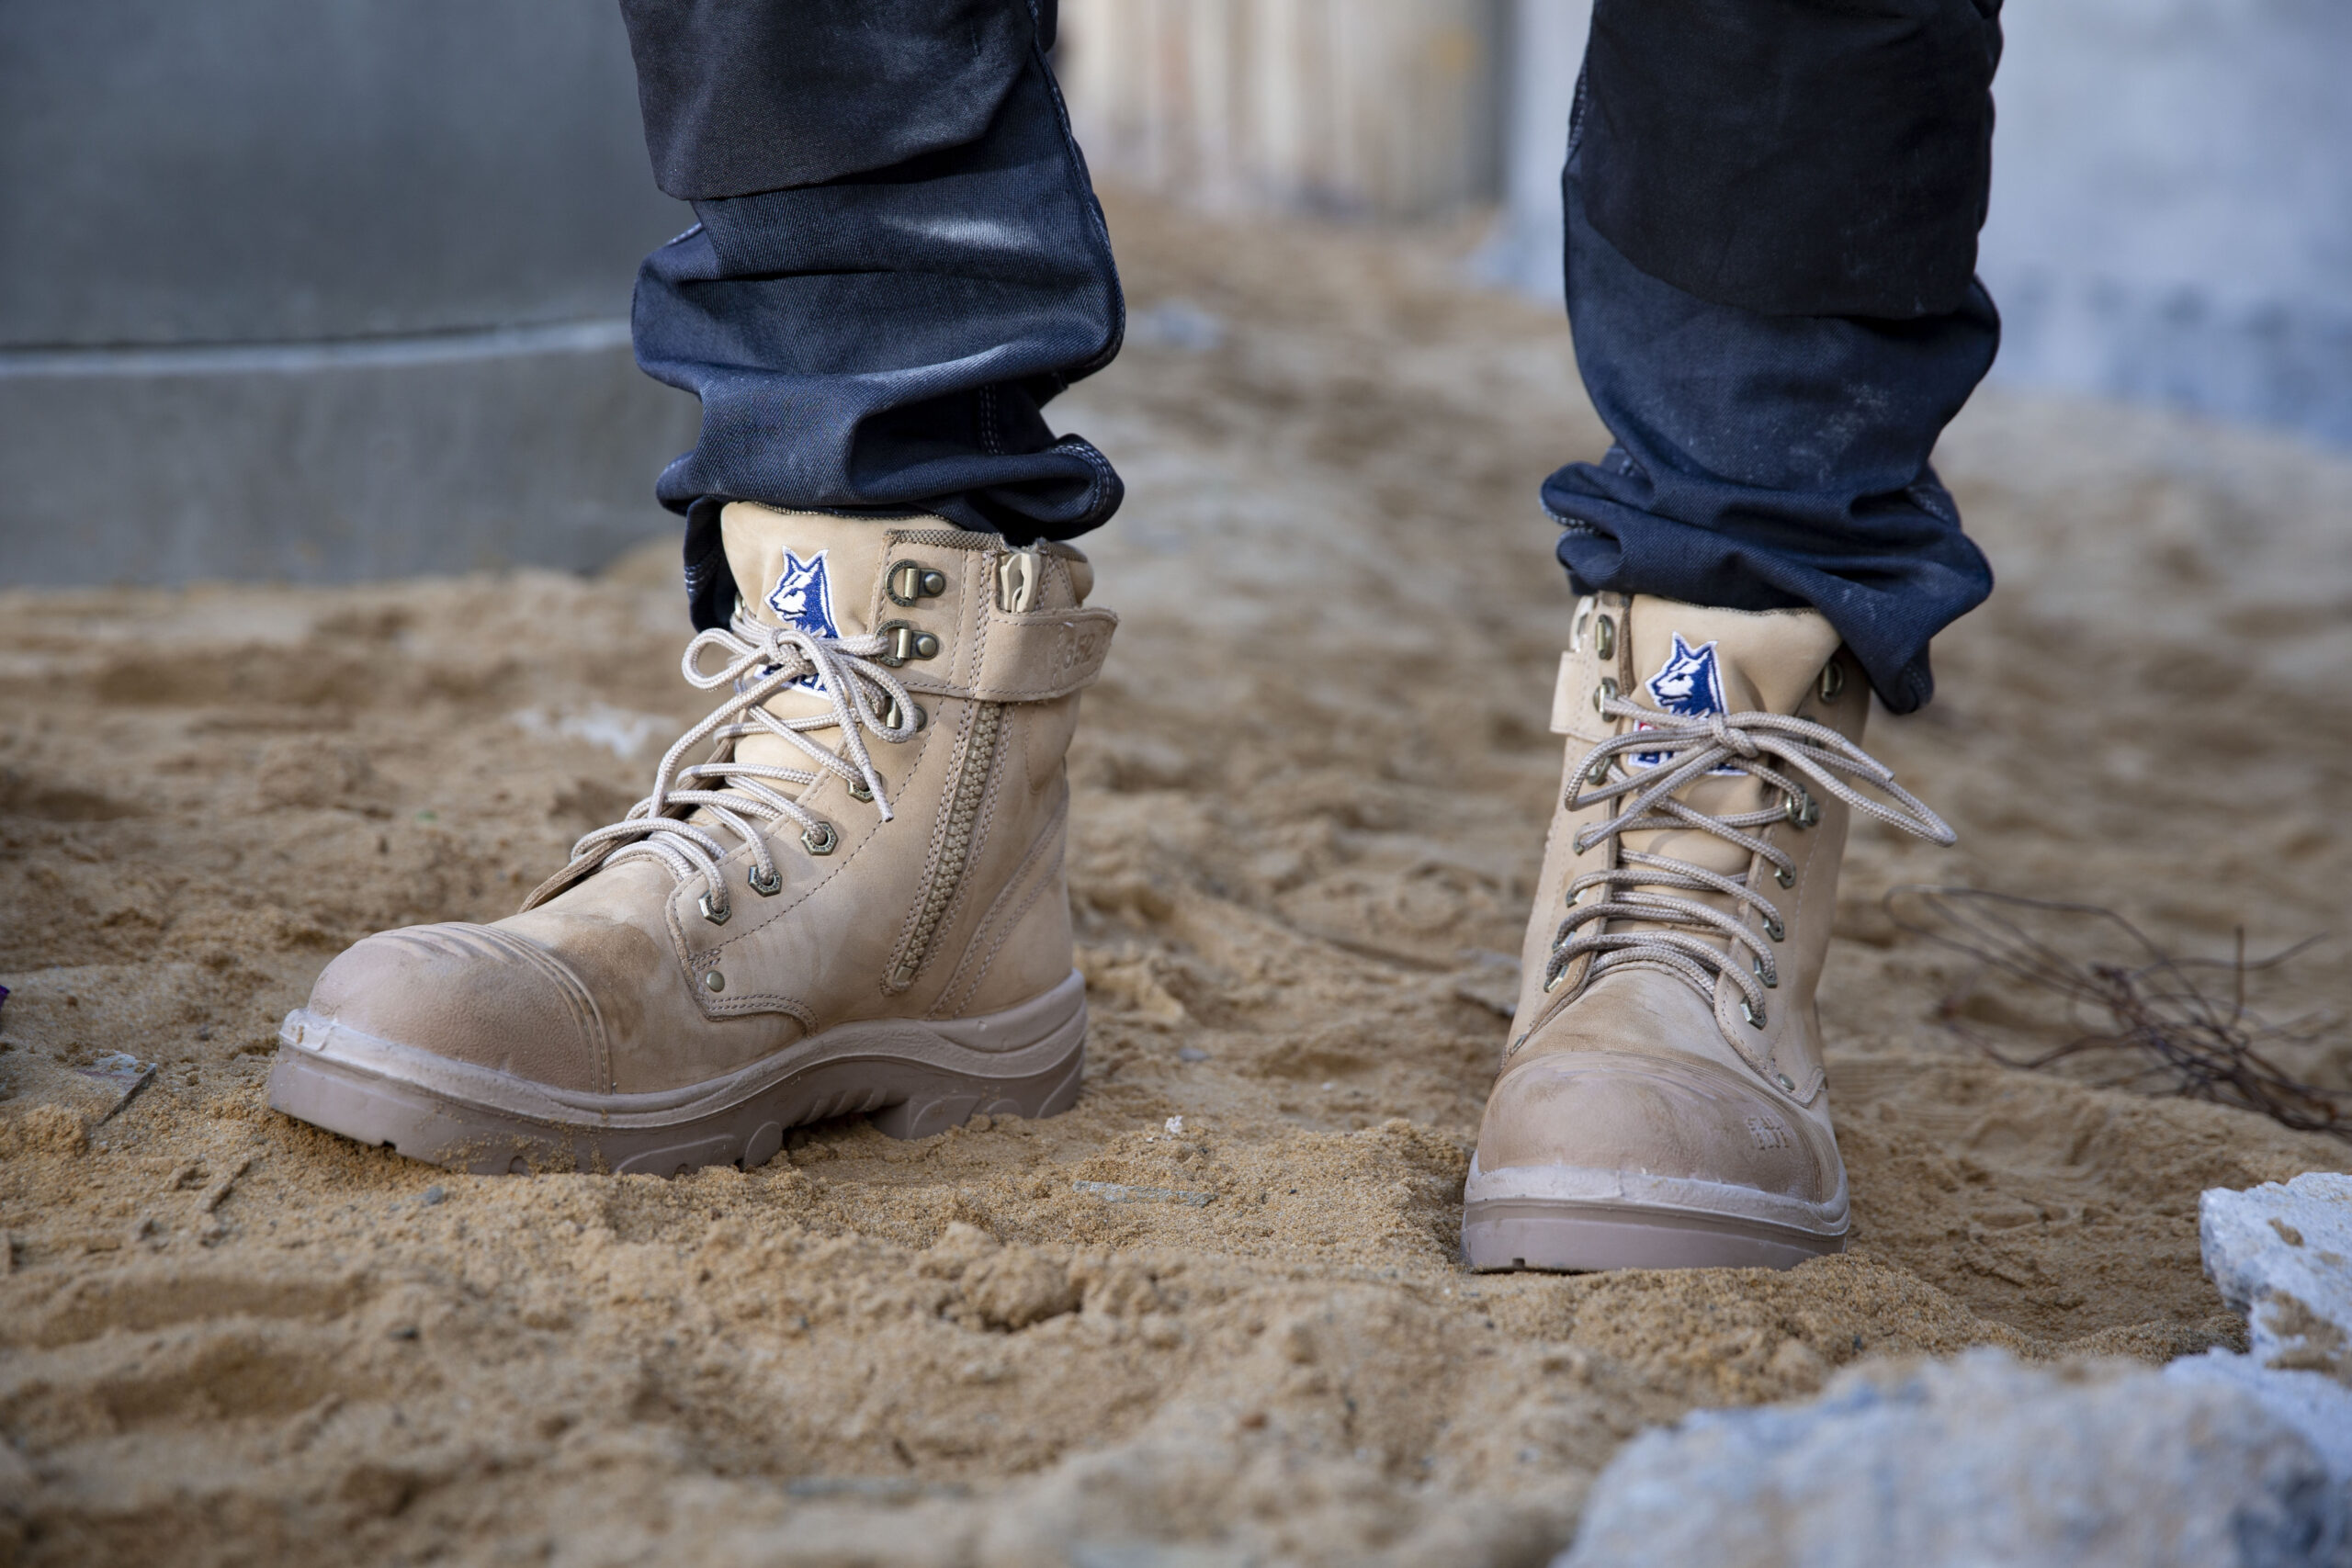 The technology behind our most comfortable safety boots